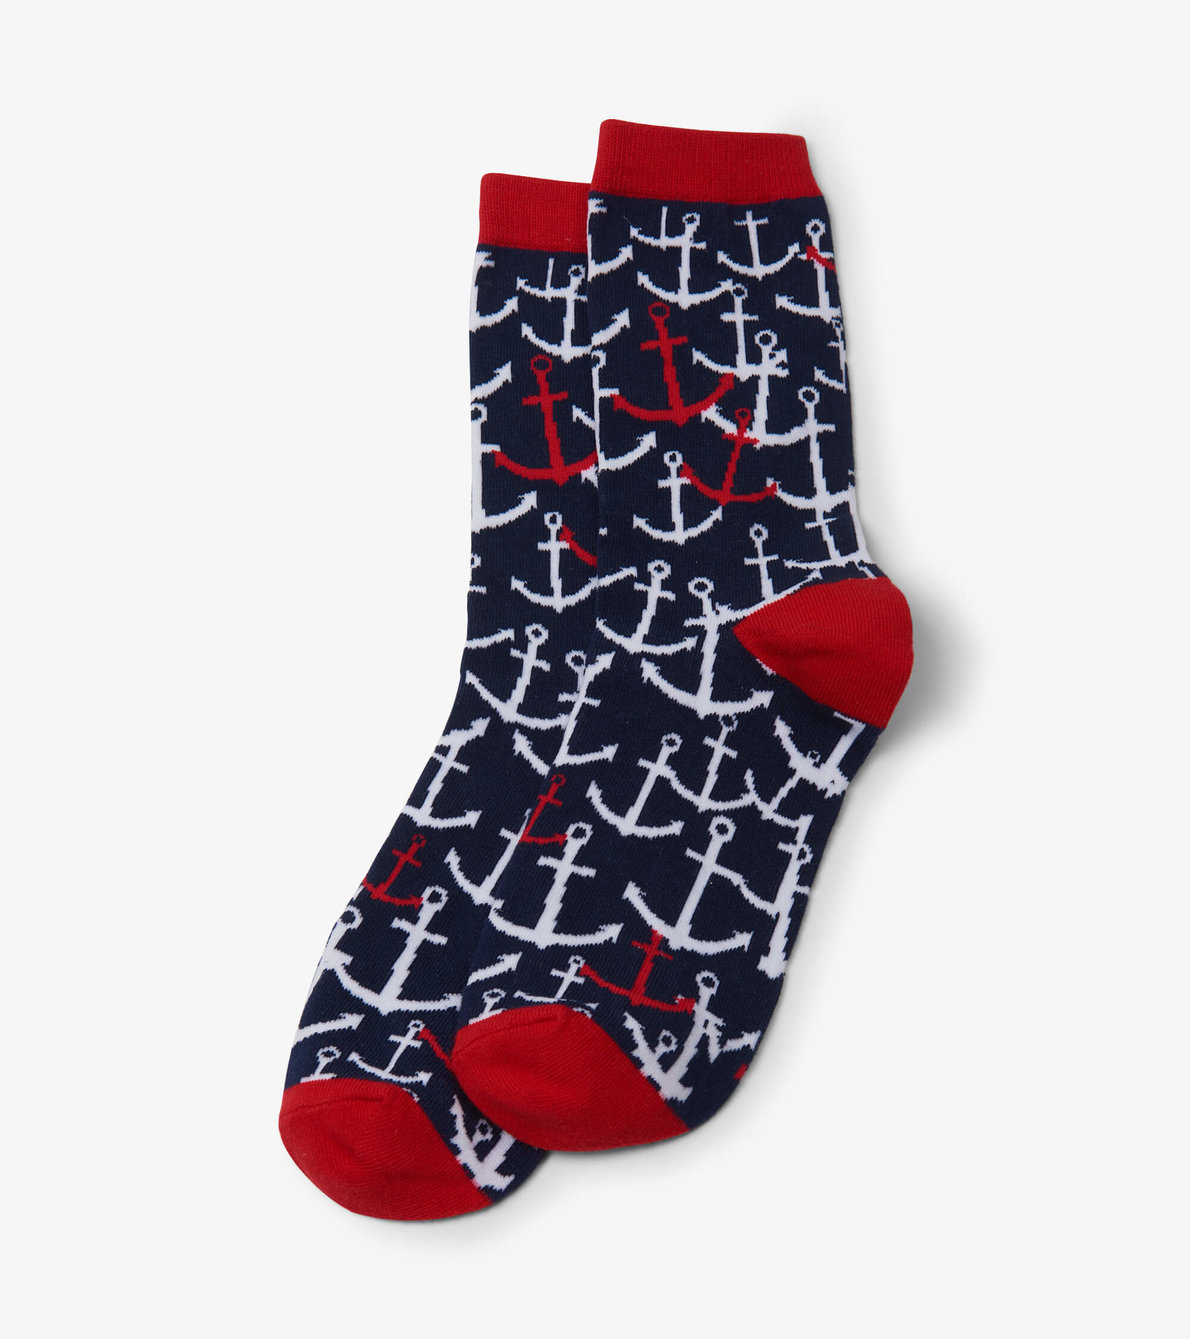 View larger image of Anchors Women's Crew Socks